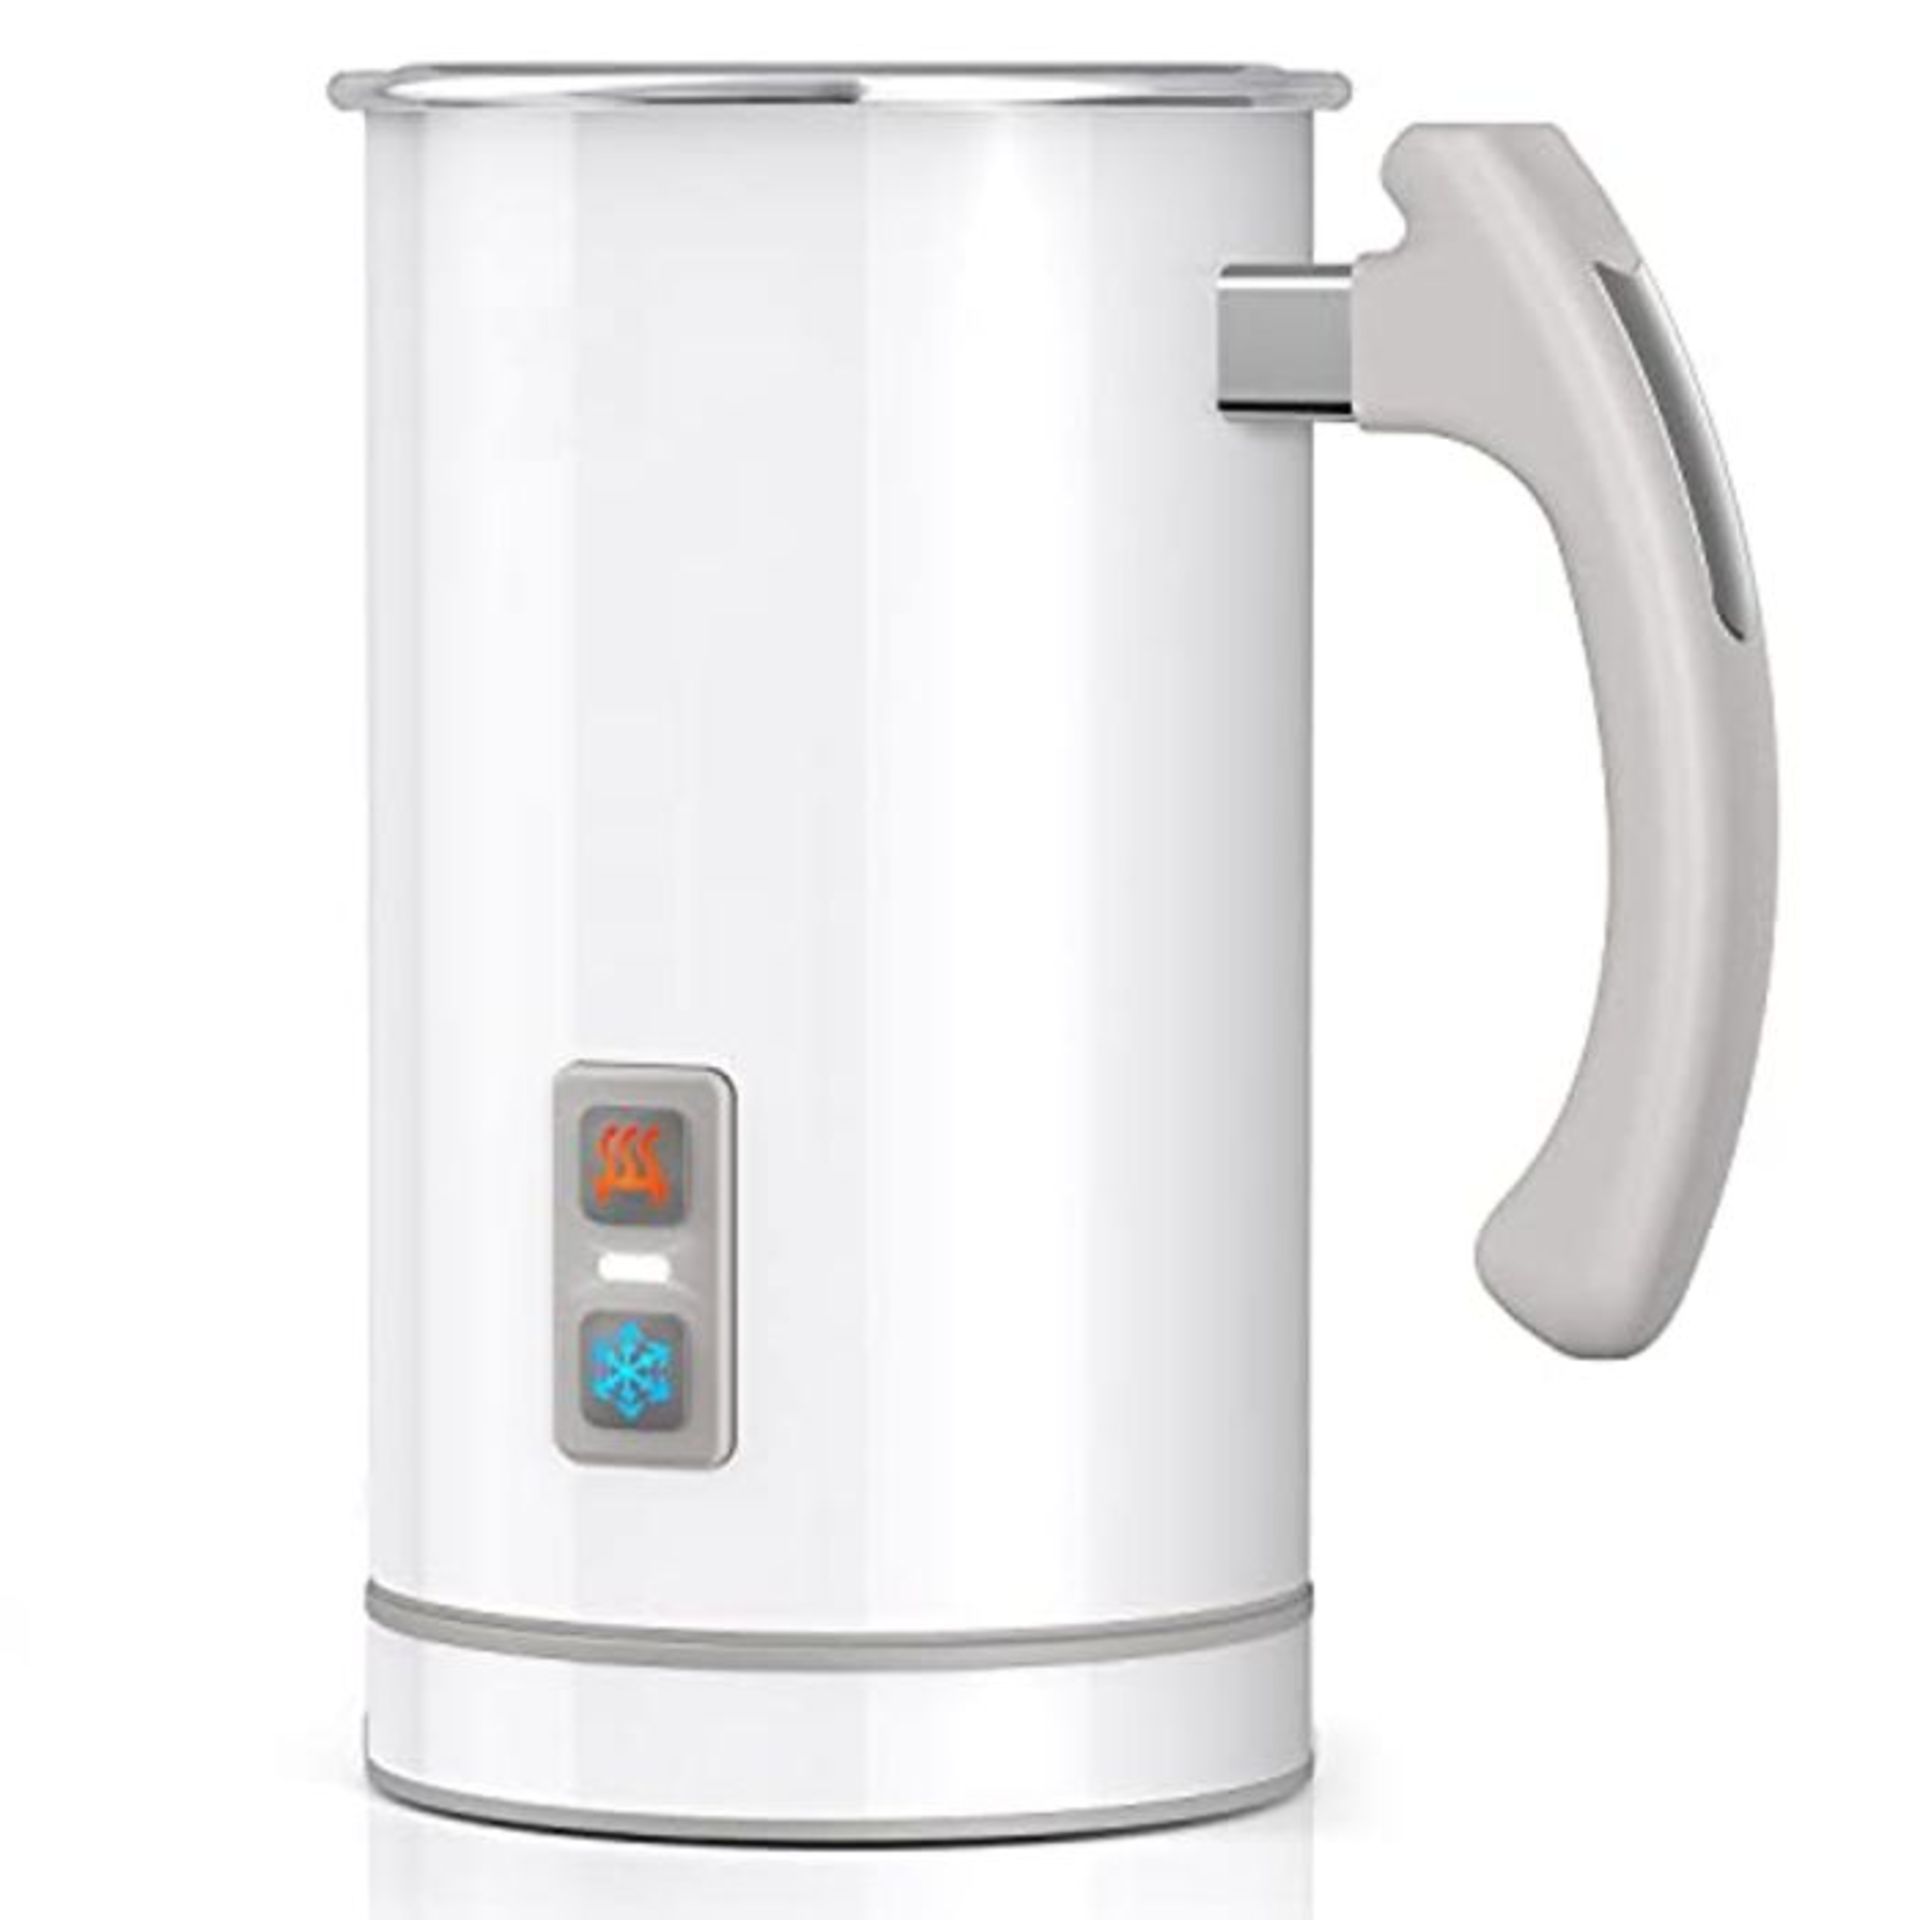 Electric Milk Frother 500 ml 650 W Stainless Steel Automatic Milk Frother Heating and